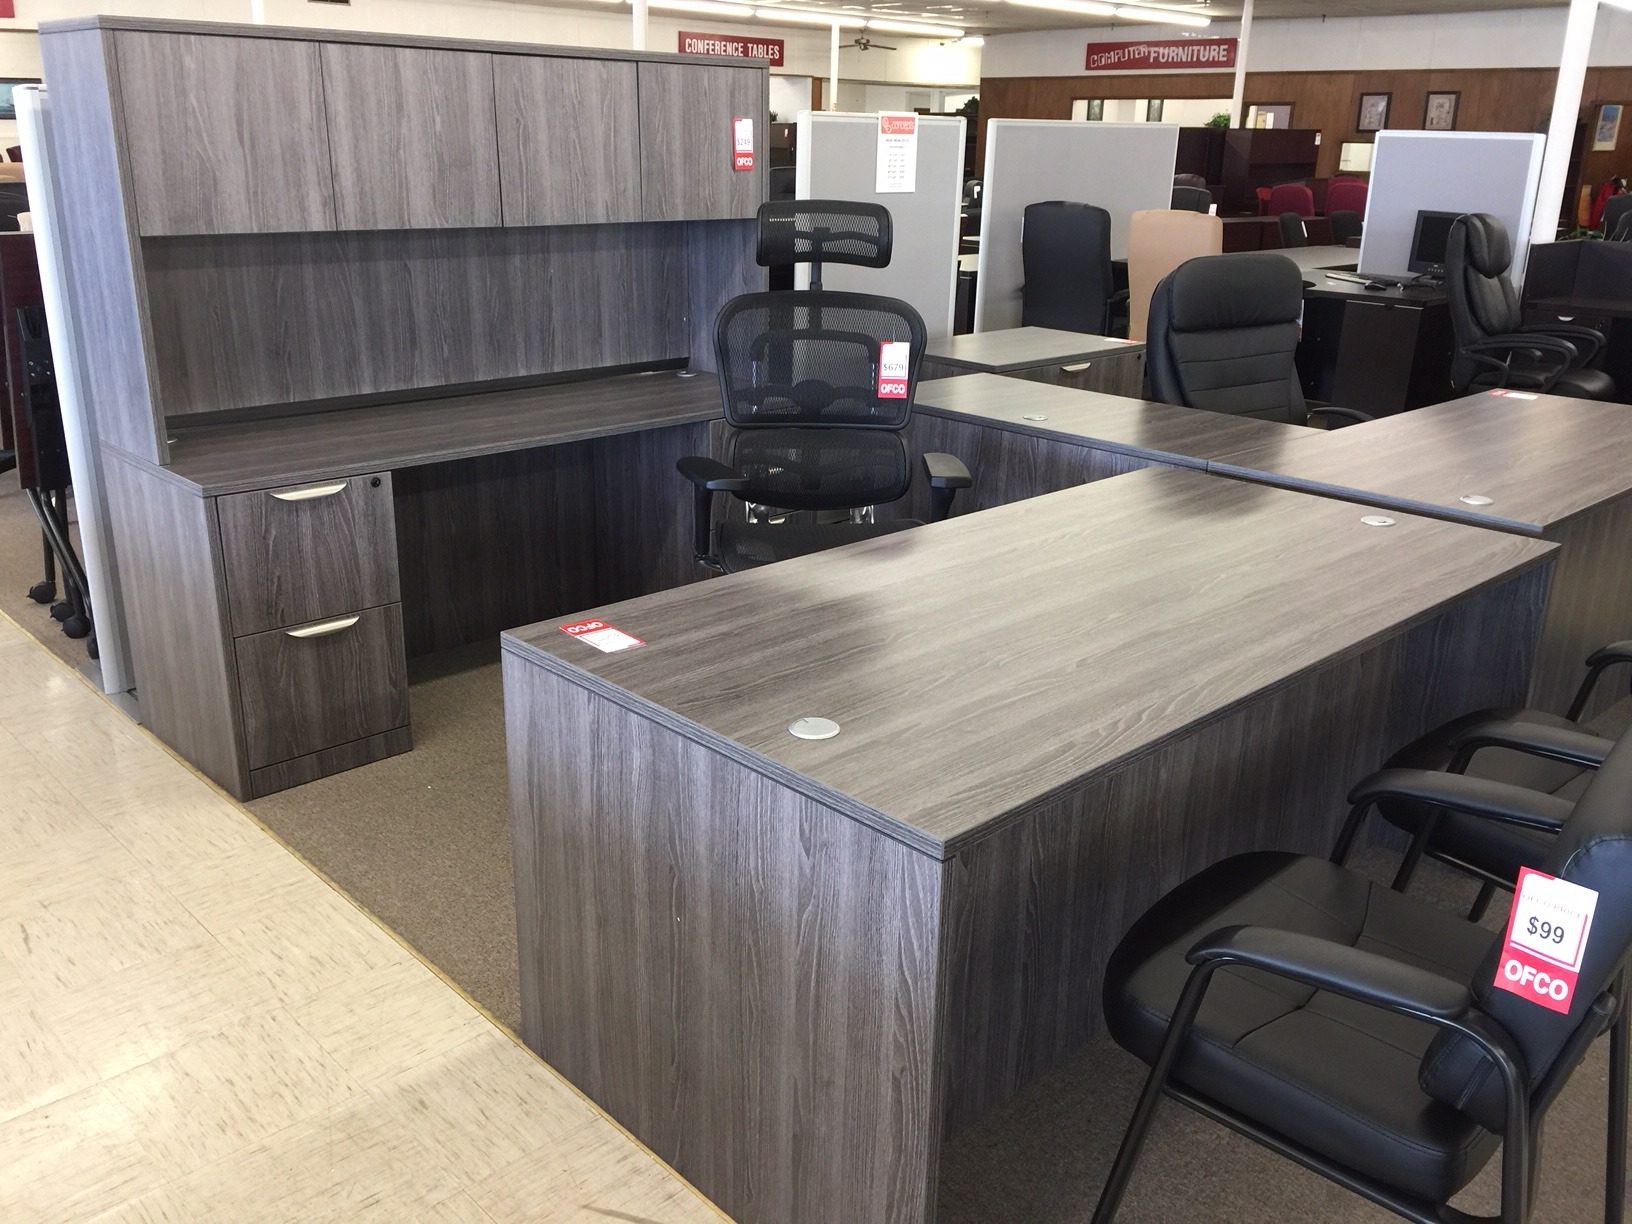 Office furniture for less money, New and used